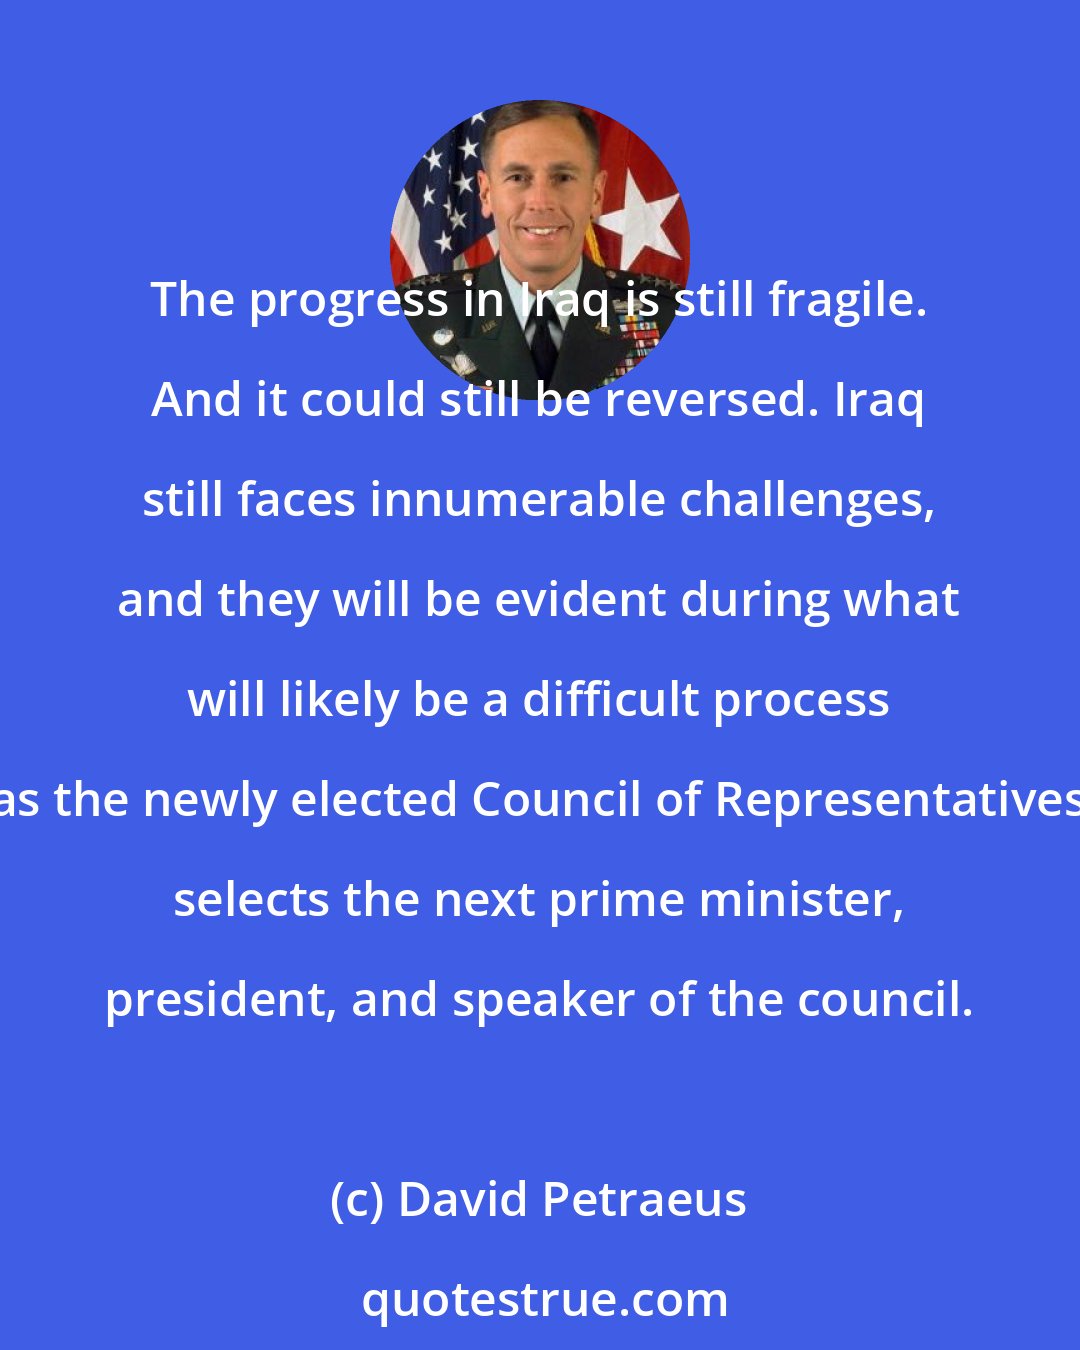 David Petraeus: The progress in Iraq is still fragile. And it could still be reversed. Iraq still faces innumerable challenges, and they will be evident during what will likely be a difficult process as the newly elected Council of Representatives selects the next prime minister, president, and speaker of the council.